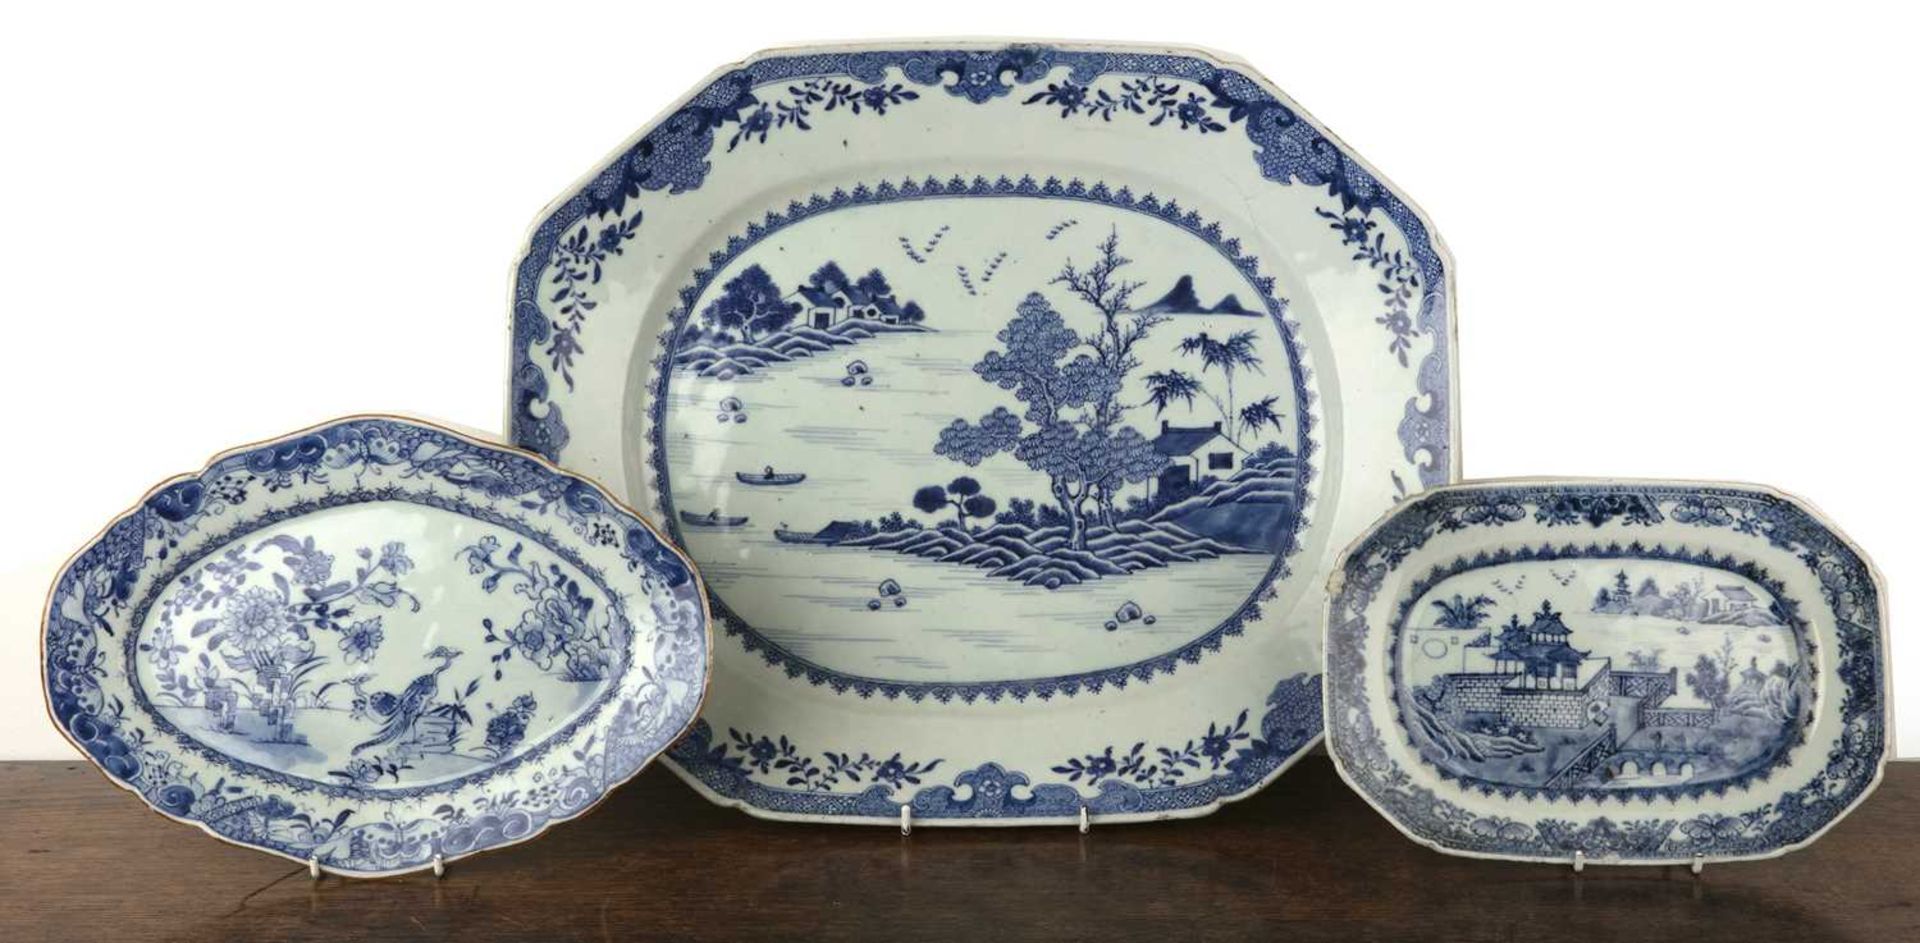 Three blue and white export dishes Chinese, circa 1800, the largest meat plate with tree and